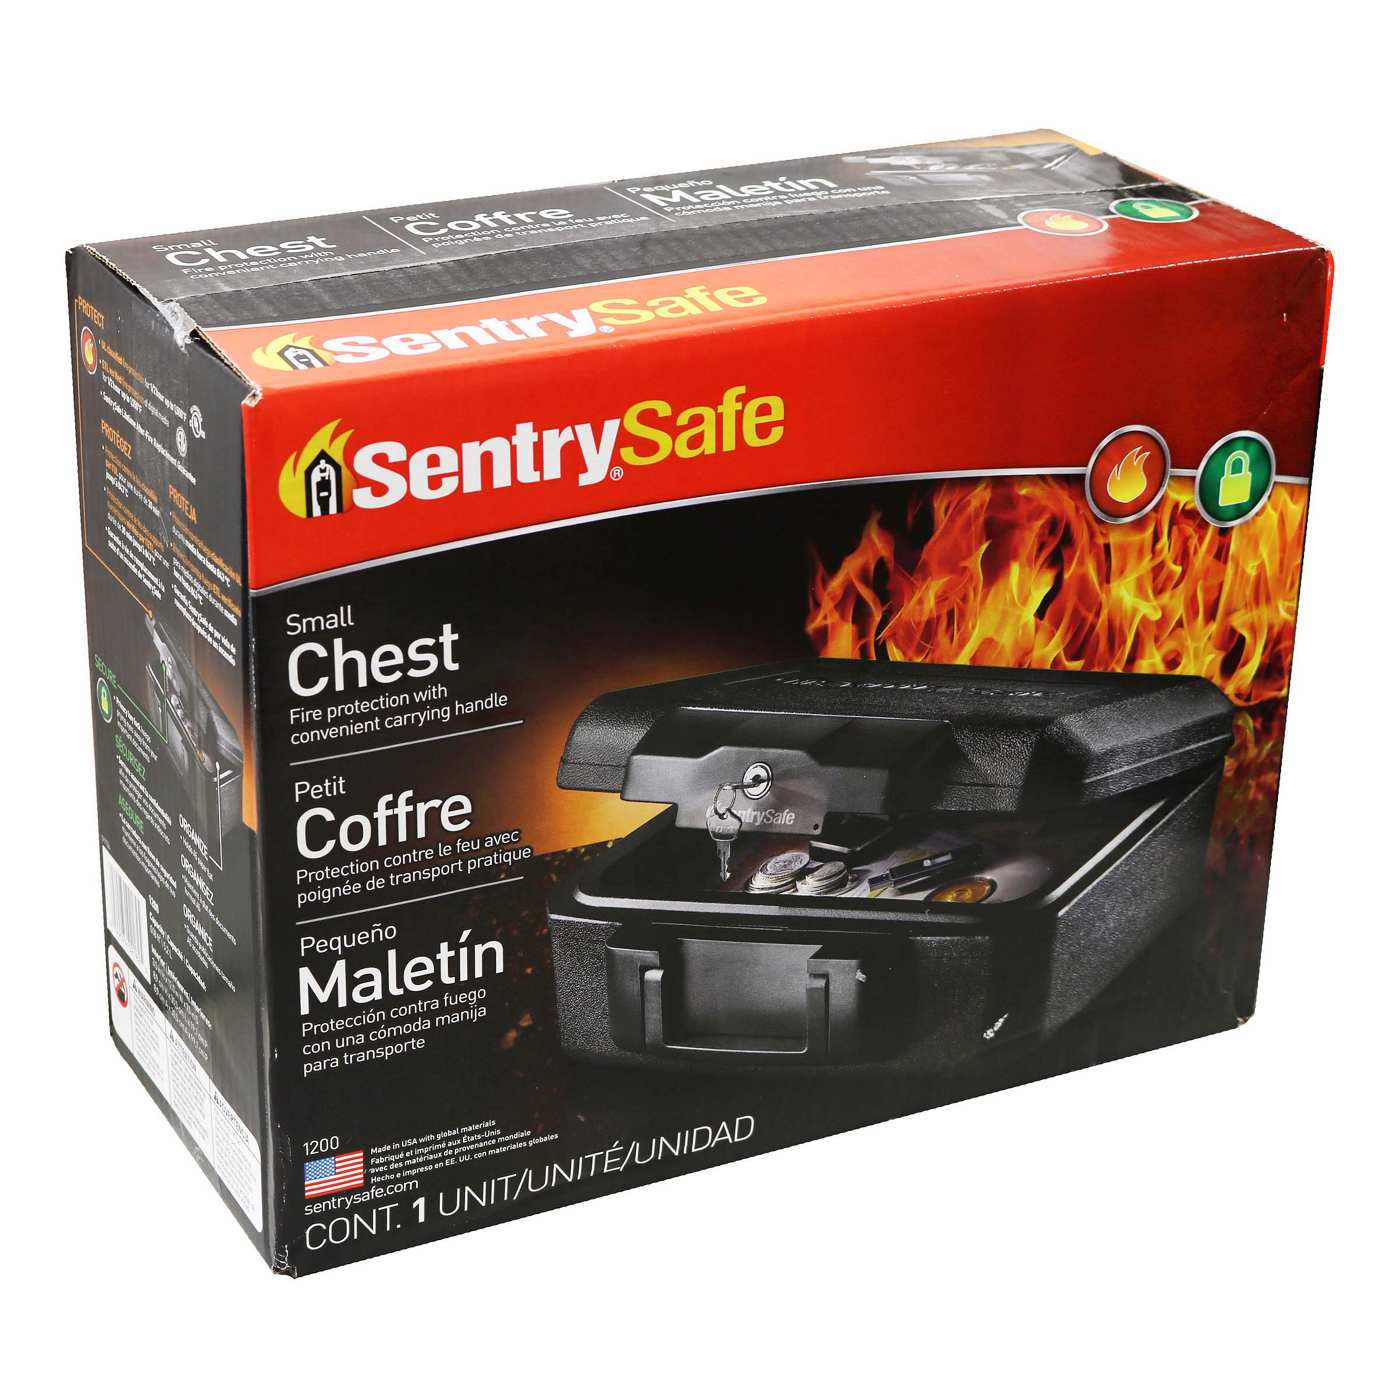 Sentry Privacy Lock Fire Safe; image 2 of 2